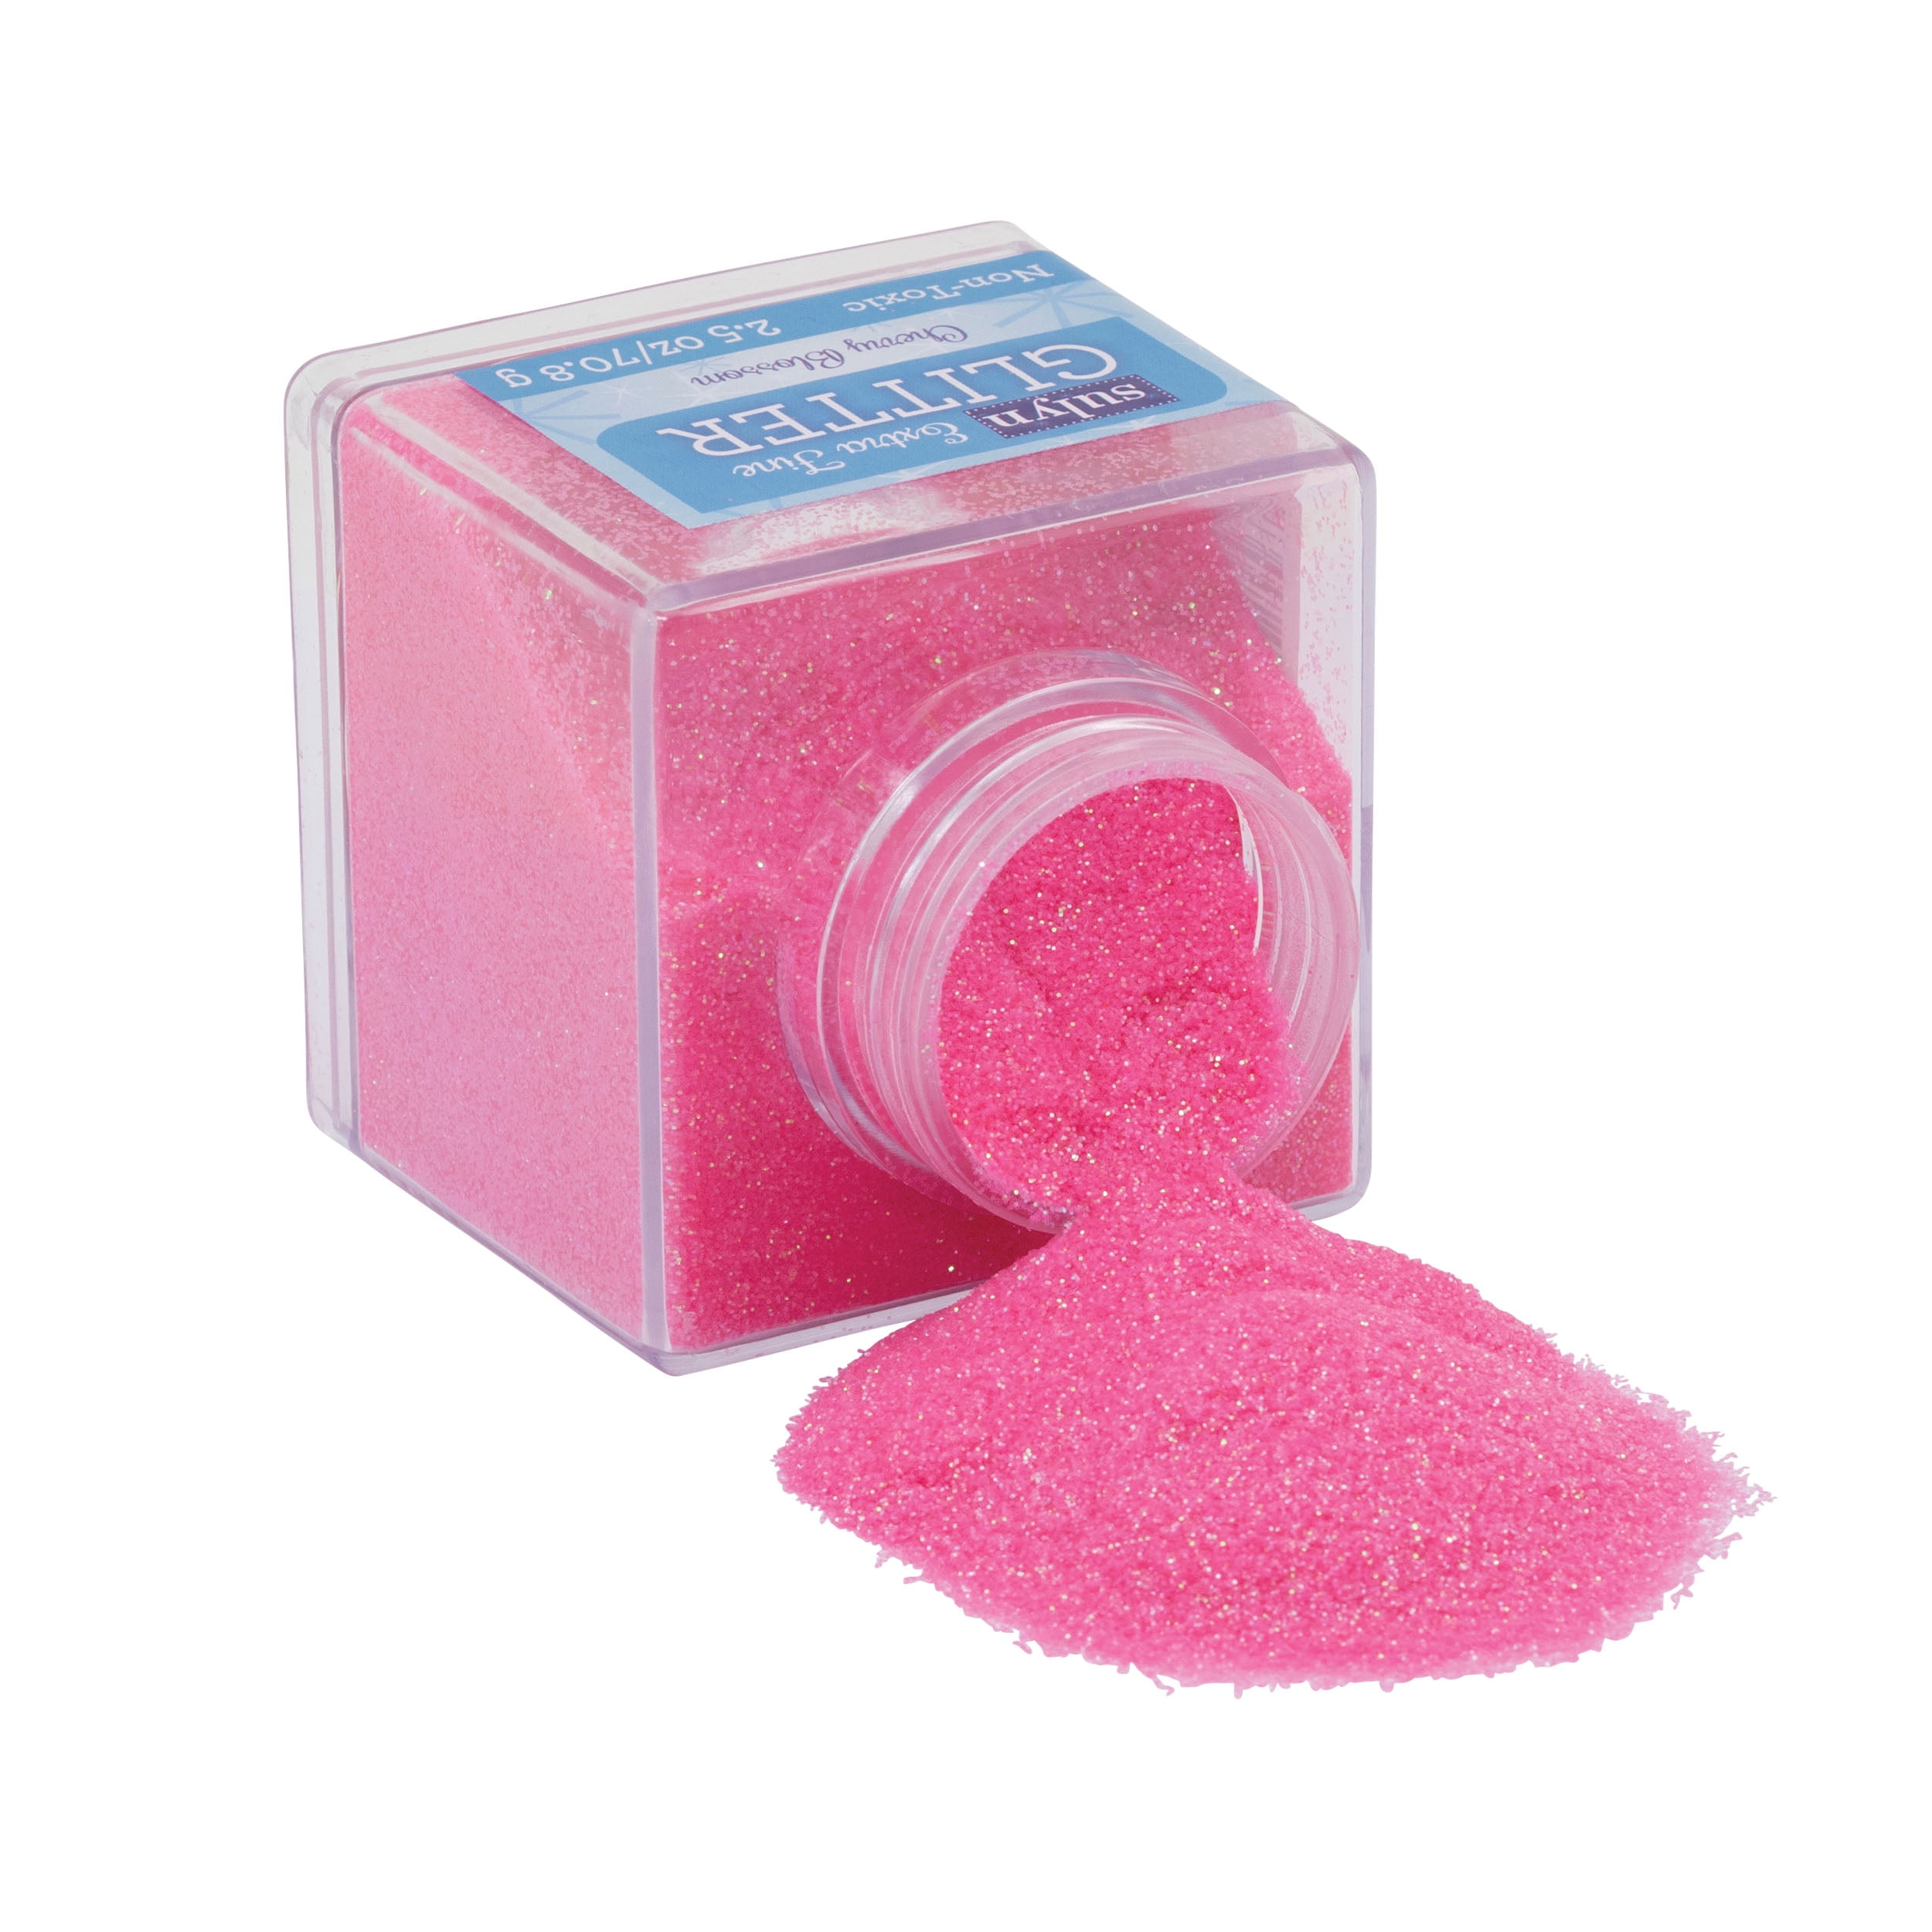 Sulyn Extra Fine Glitter for Crafts, Ruby Red, 2.5 oz - Walmart.com